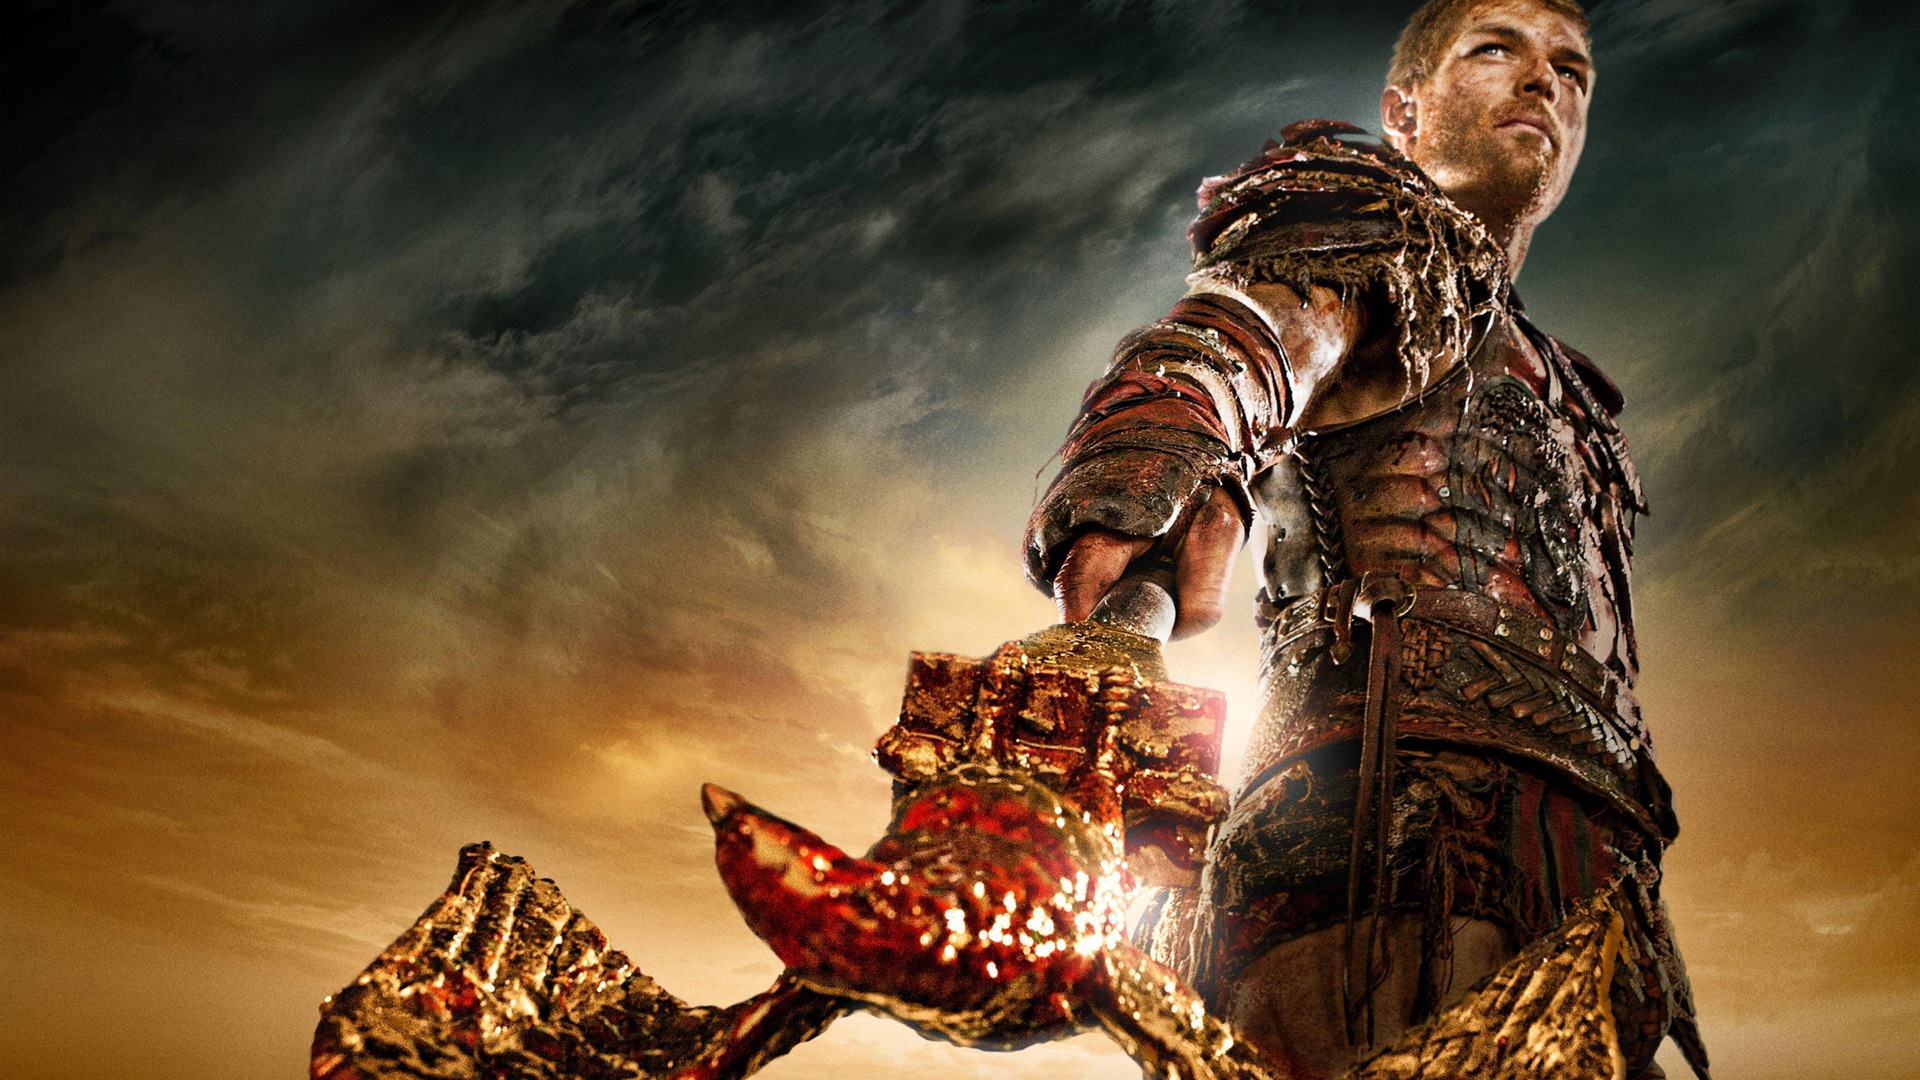 Spartacus War Of The Damned Hd Wallpapers 19 19x1080 Wallpaper Download Spartacus War Of The Damned Hd Wallpapers Moive Wallpapers V3 Wallpaper Site